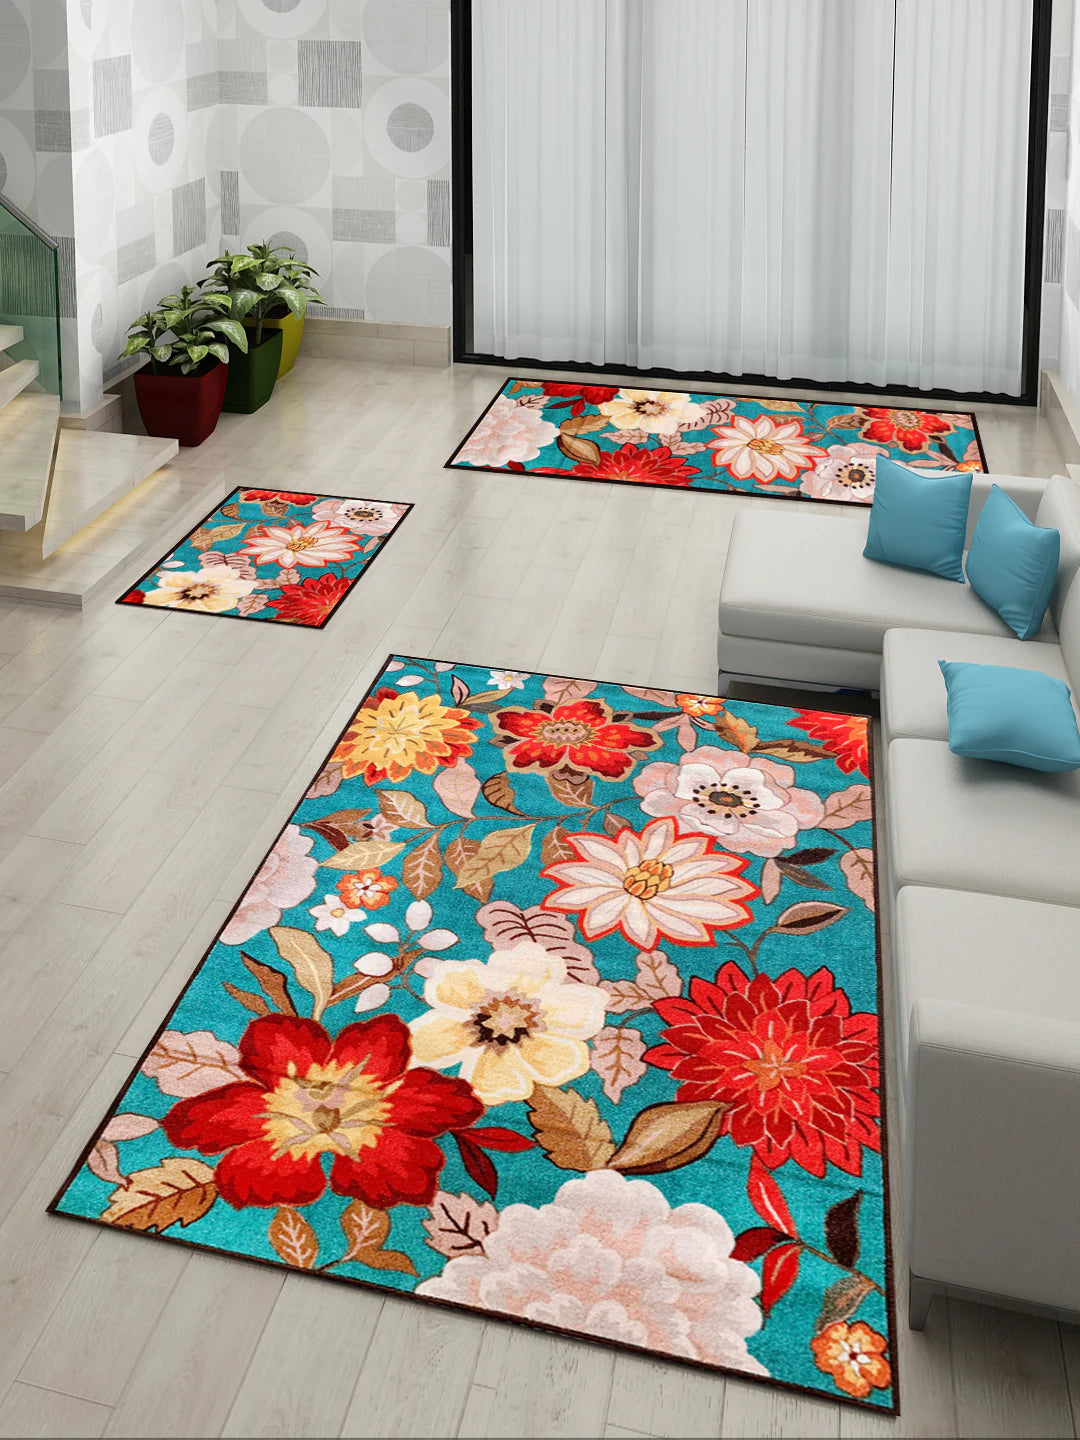 Elevate Your Home's Entrance with the Athom Living Floral Love Premium Doormat, Runner, and Carpet Set